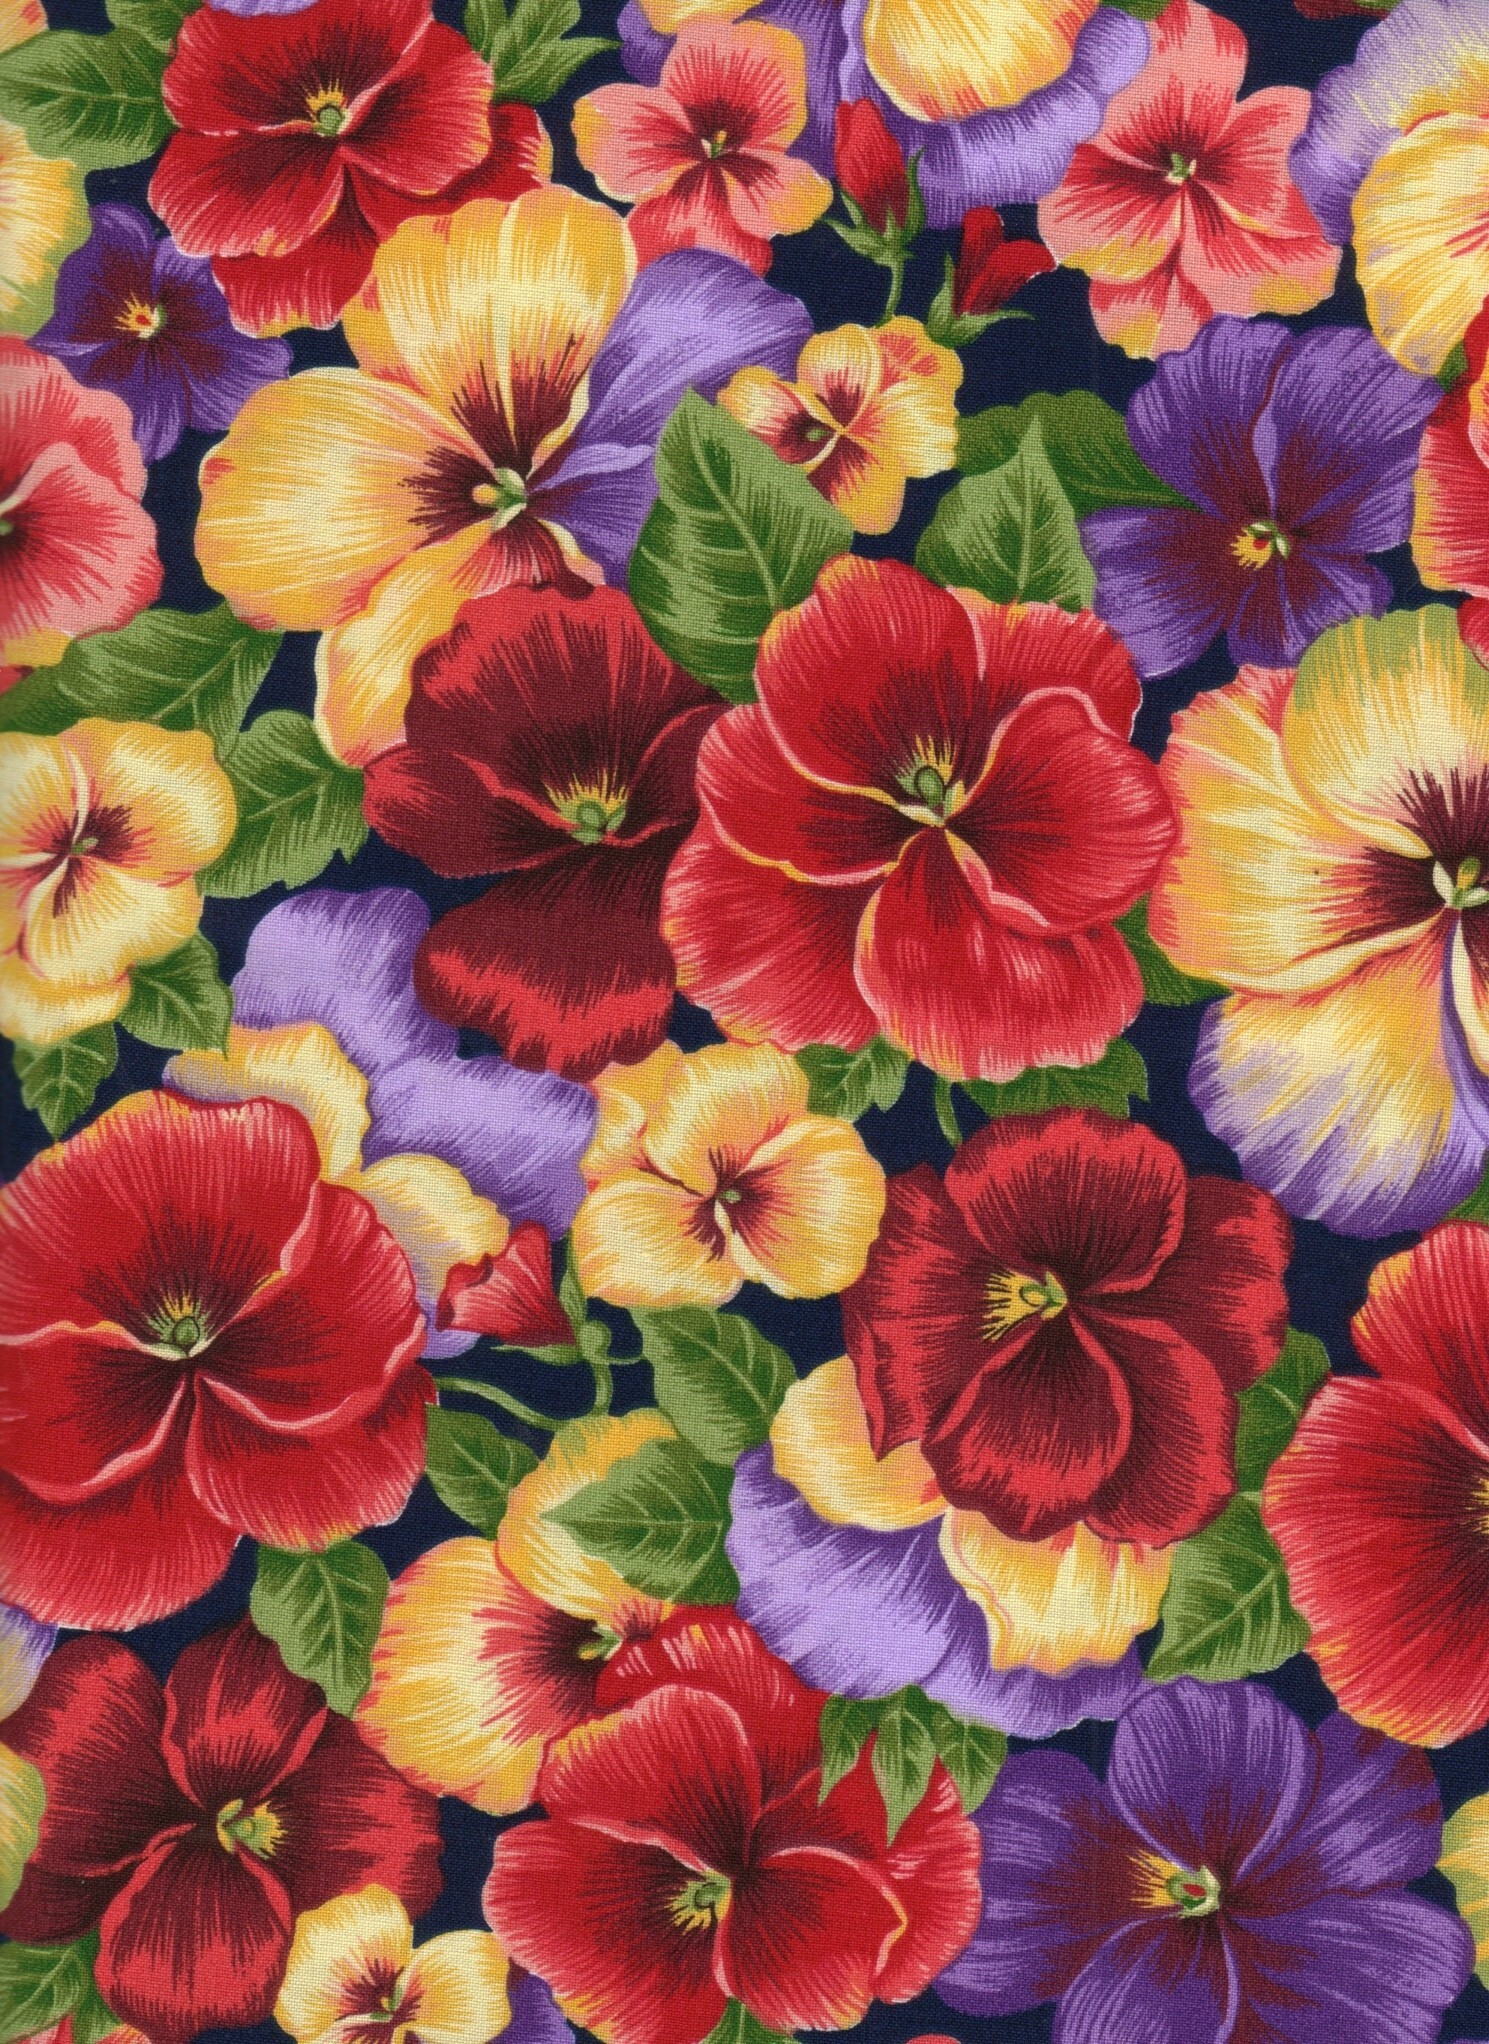 1489x2044 Pansies stand for good thoughts.